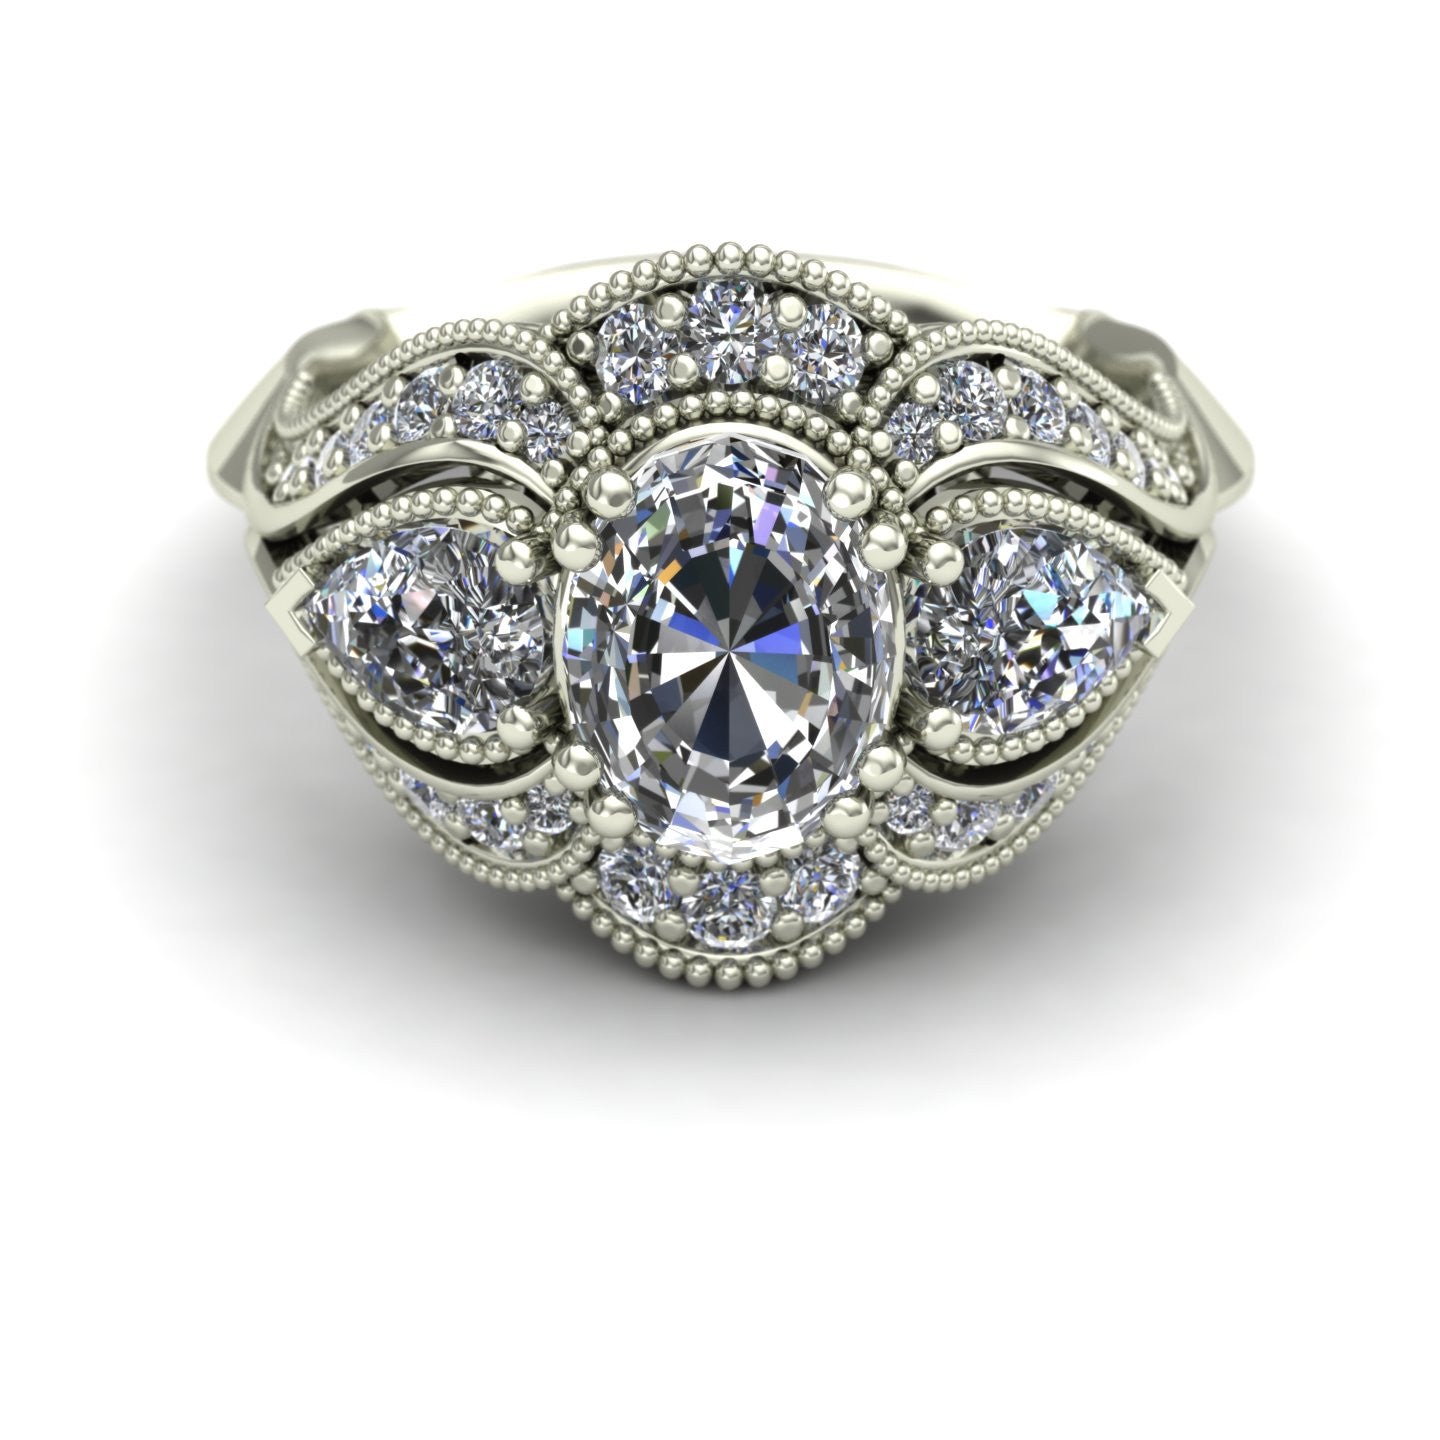 Oval and pear diamond engagement ring in 18k white gold - Charles Babb Designs - top view